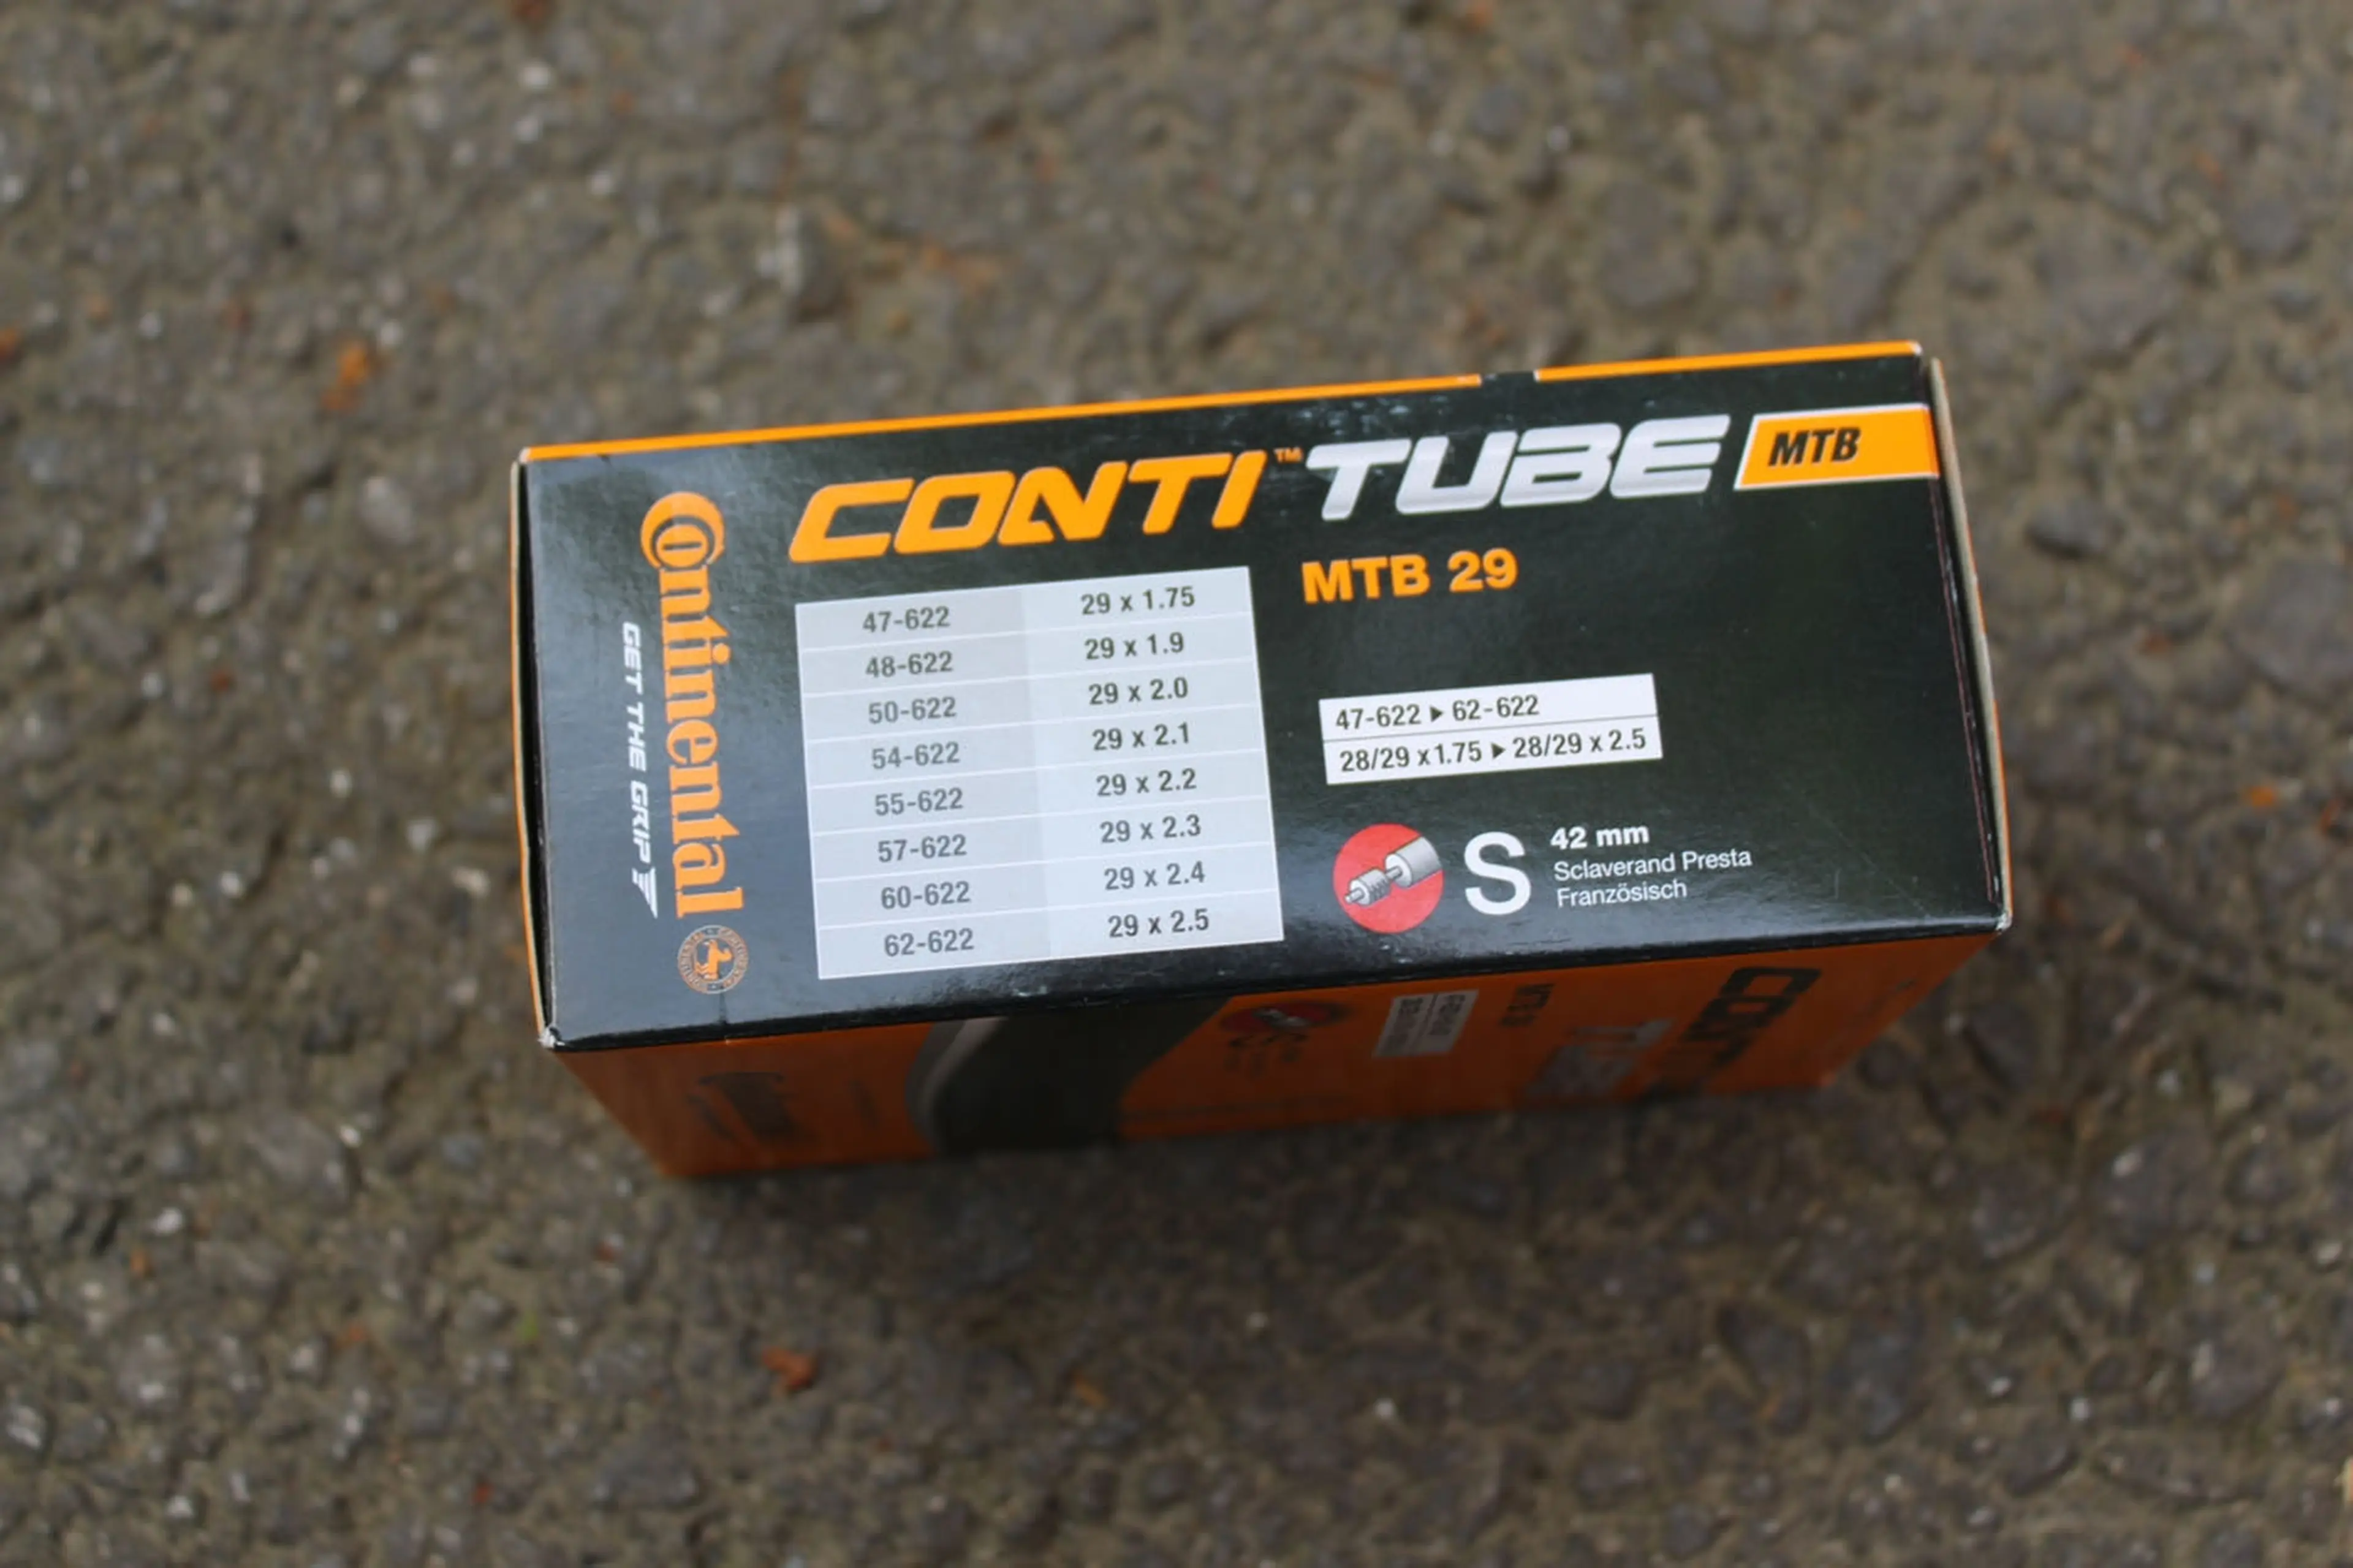 1. Continental Wide Tube 29x1.75-2.50 FV.